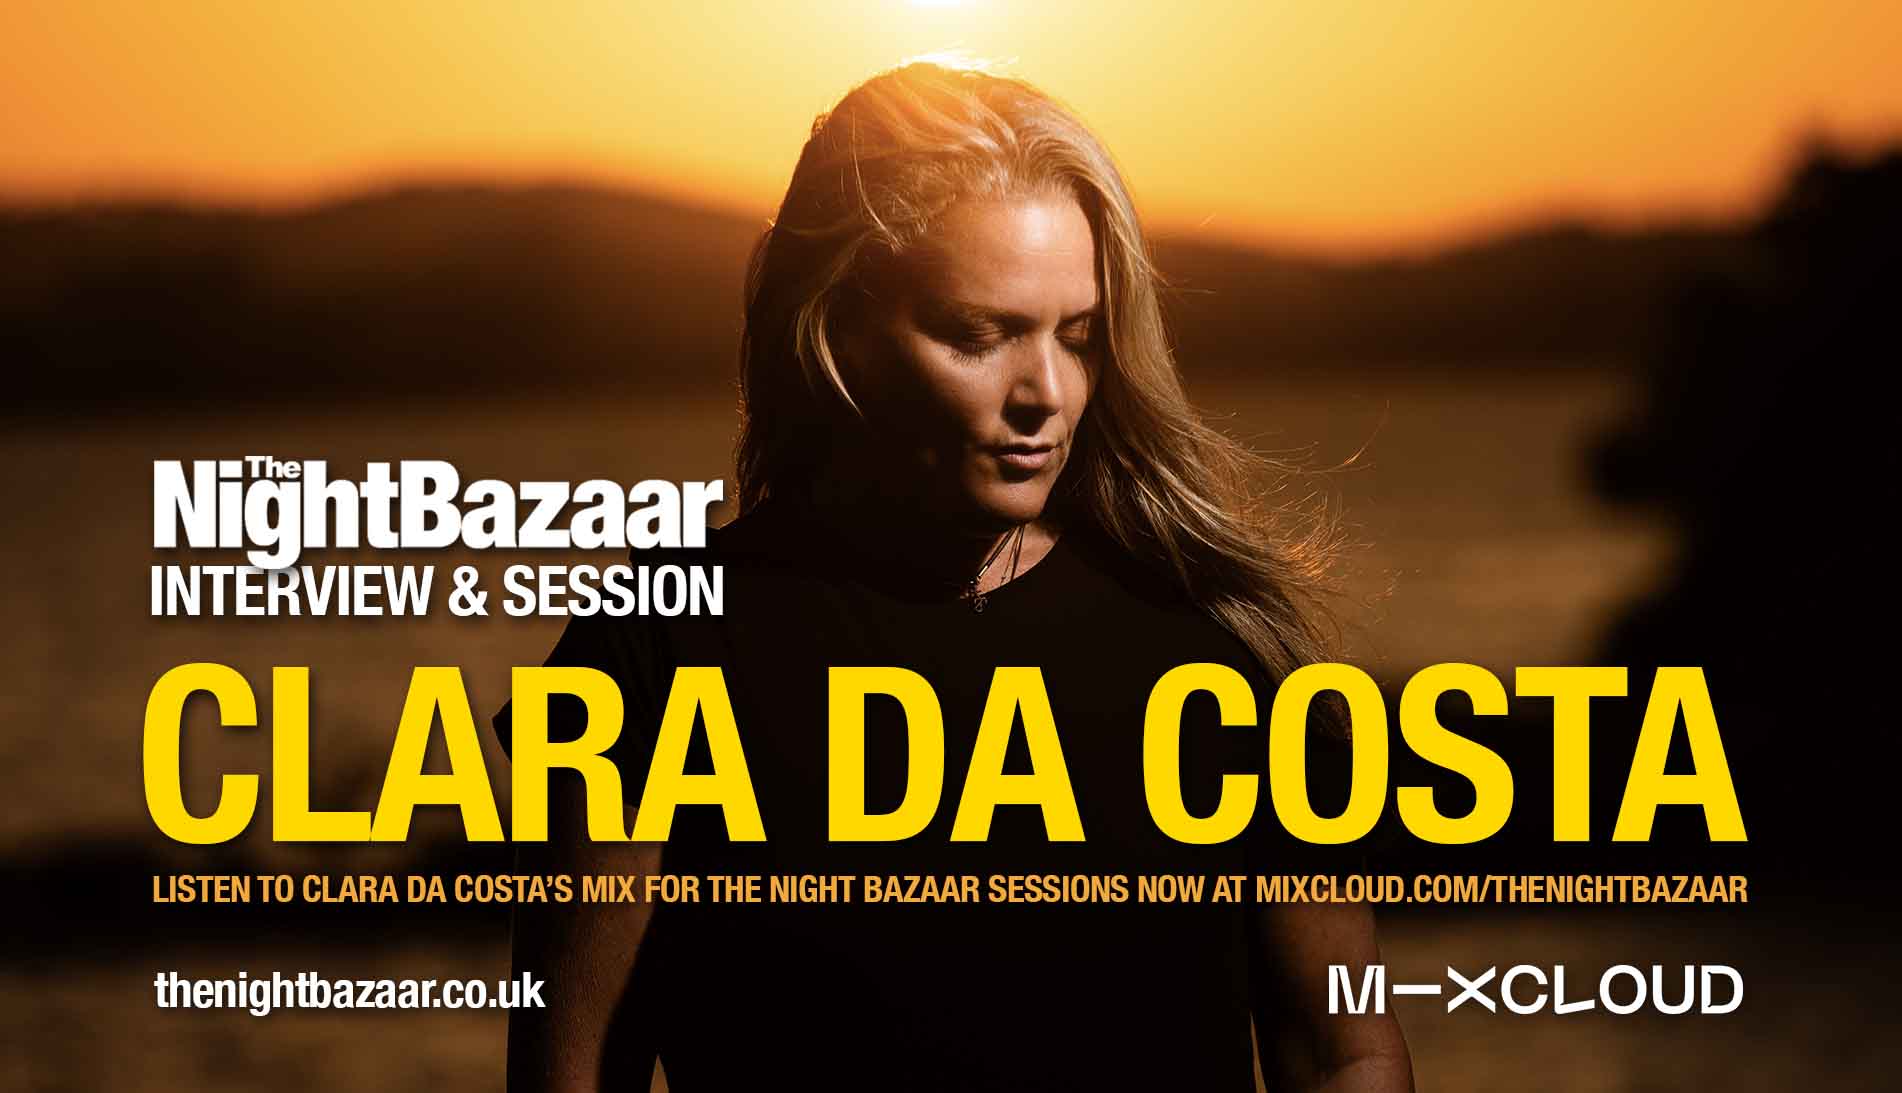 CLICK OR TAP IMAGE TO LISTEN TO CLARA DA COSTA'S EXCLUSIVE MIX FOR THE NIGHT BAZAAR SESSIONS ON MIXCLOUD